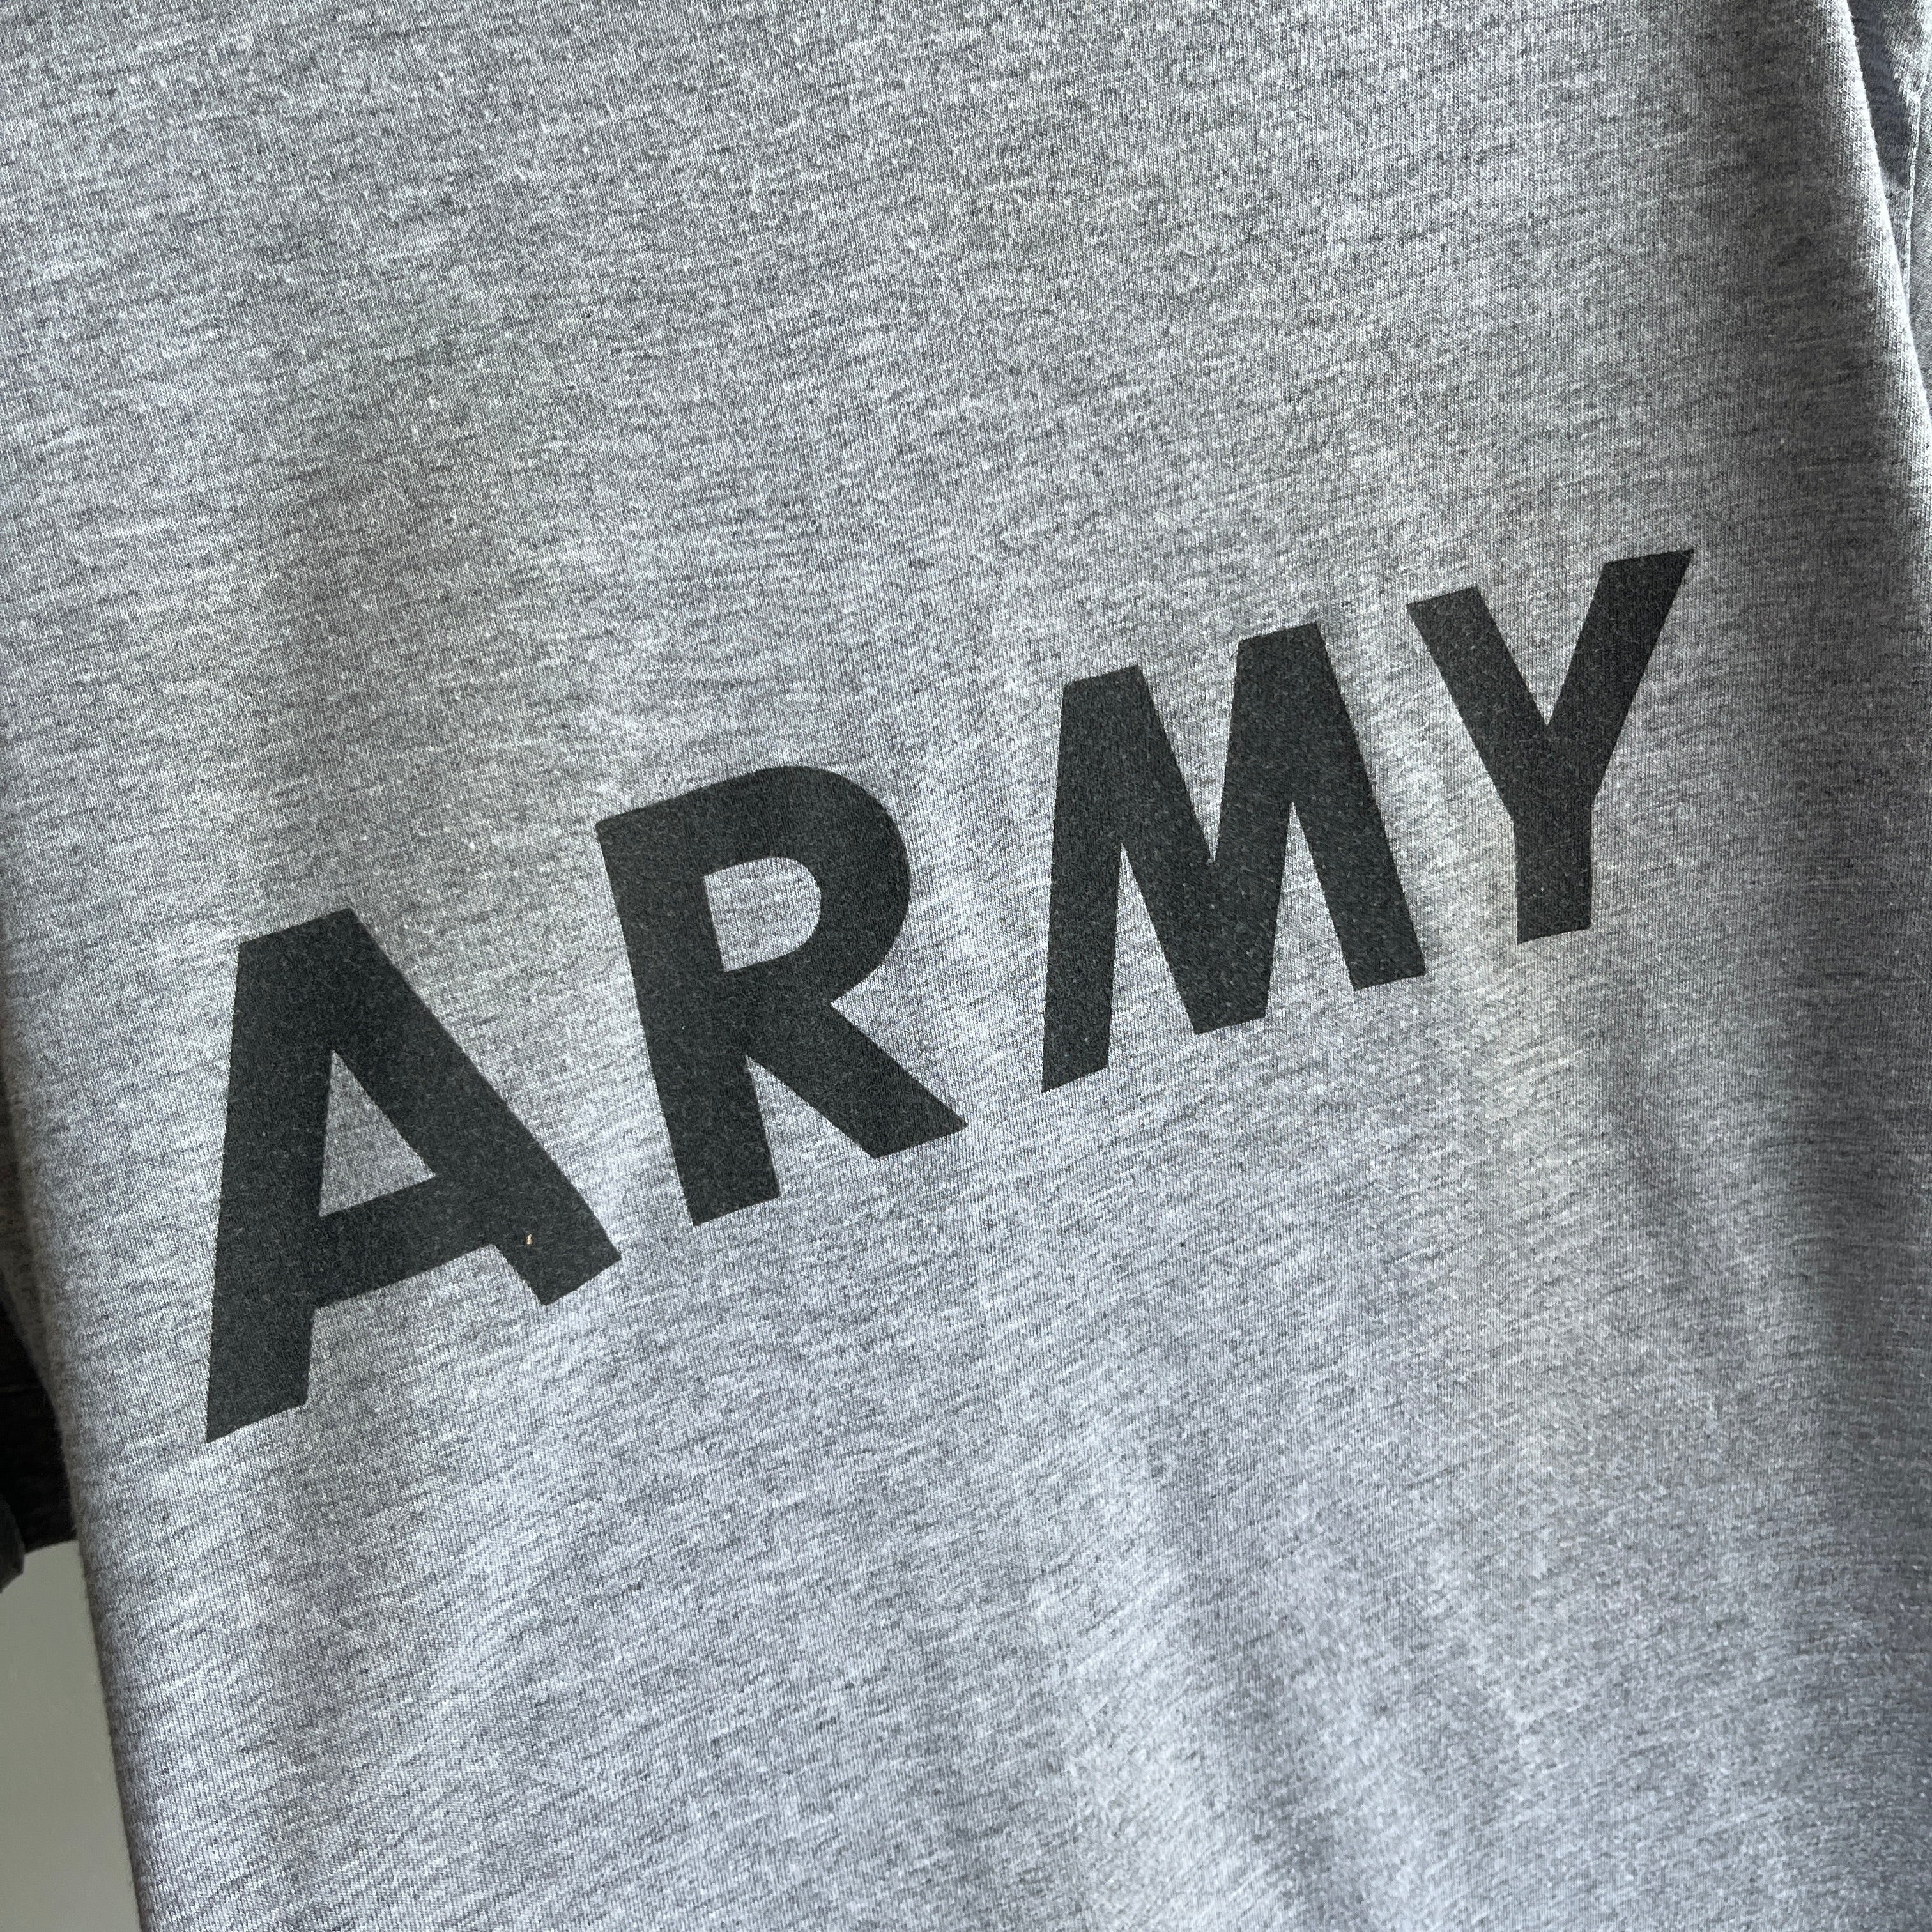 1990s US Army Gray T-Shirt - Front and Back